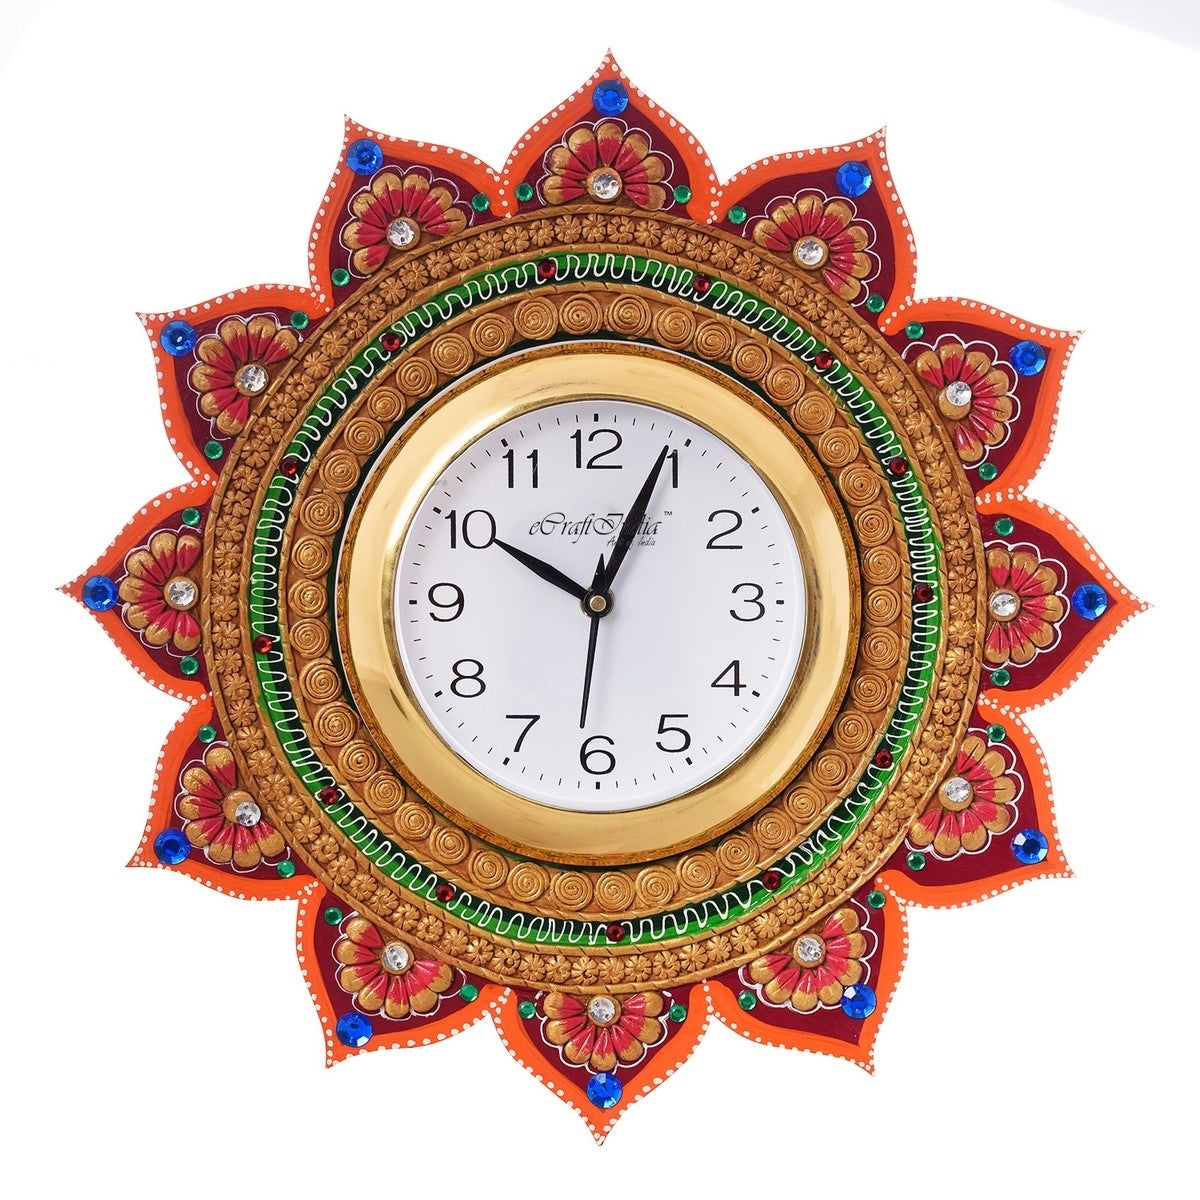 Royal and Elegant Handcrafted Flower Design Decorative Papier Mache Wooden Wall Clock